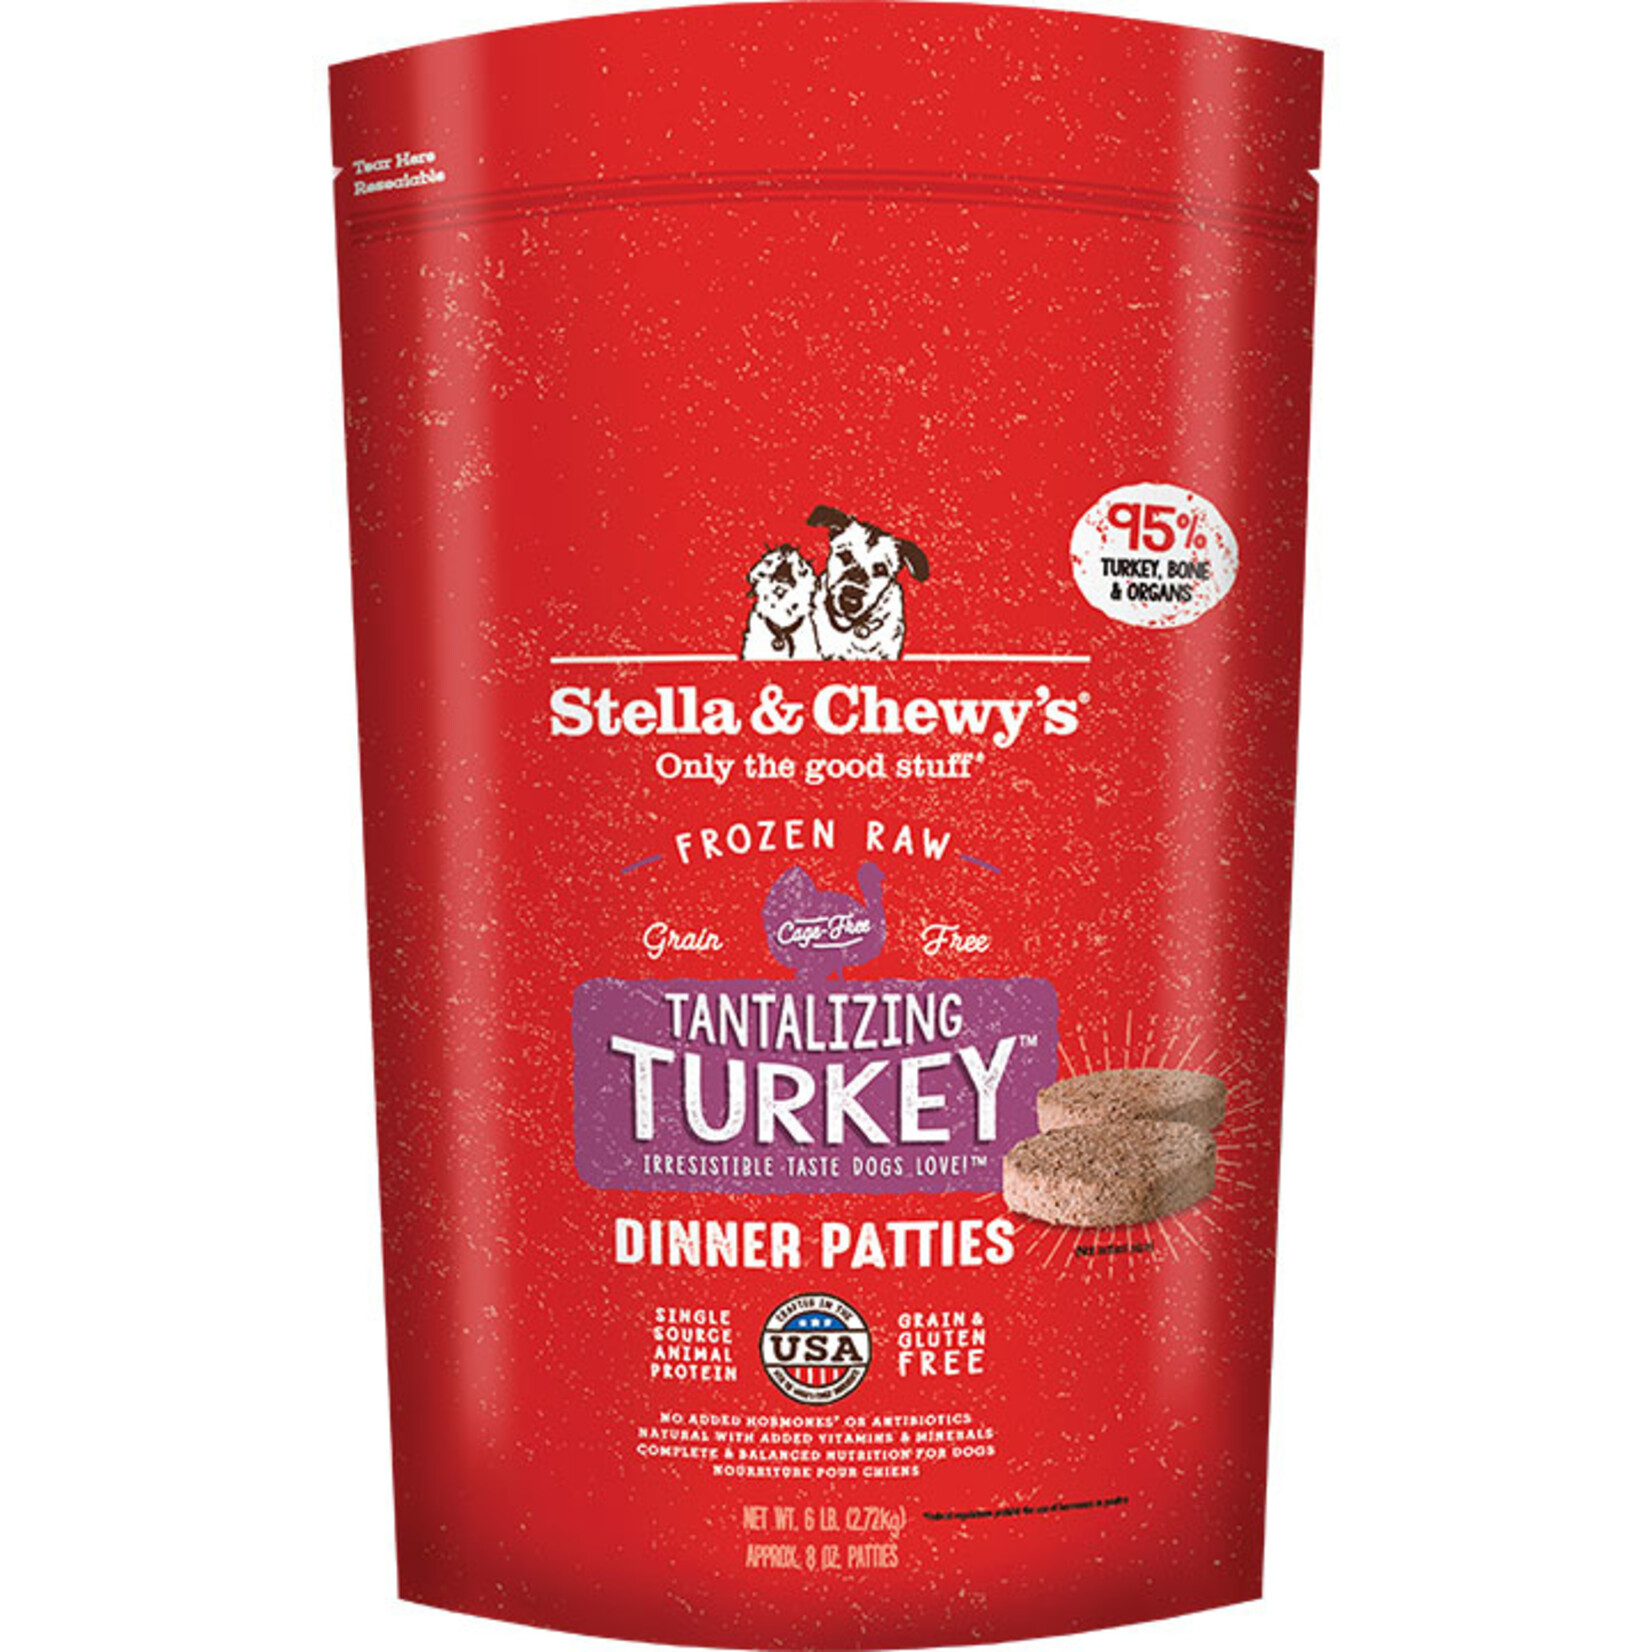 Stella and Chewy's Stella & Chewy's Frozen Raw Dinner Patties Tantalizing Turkey 6lb